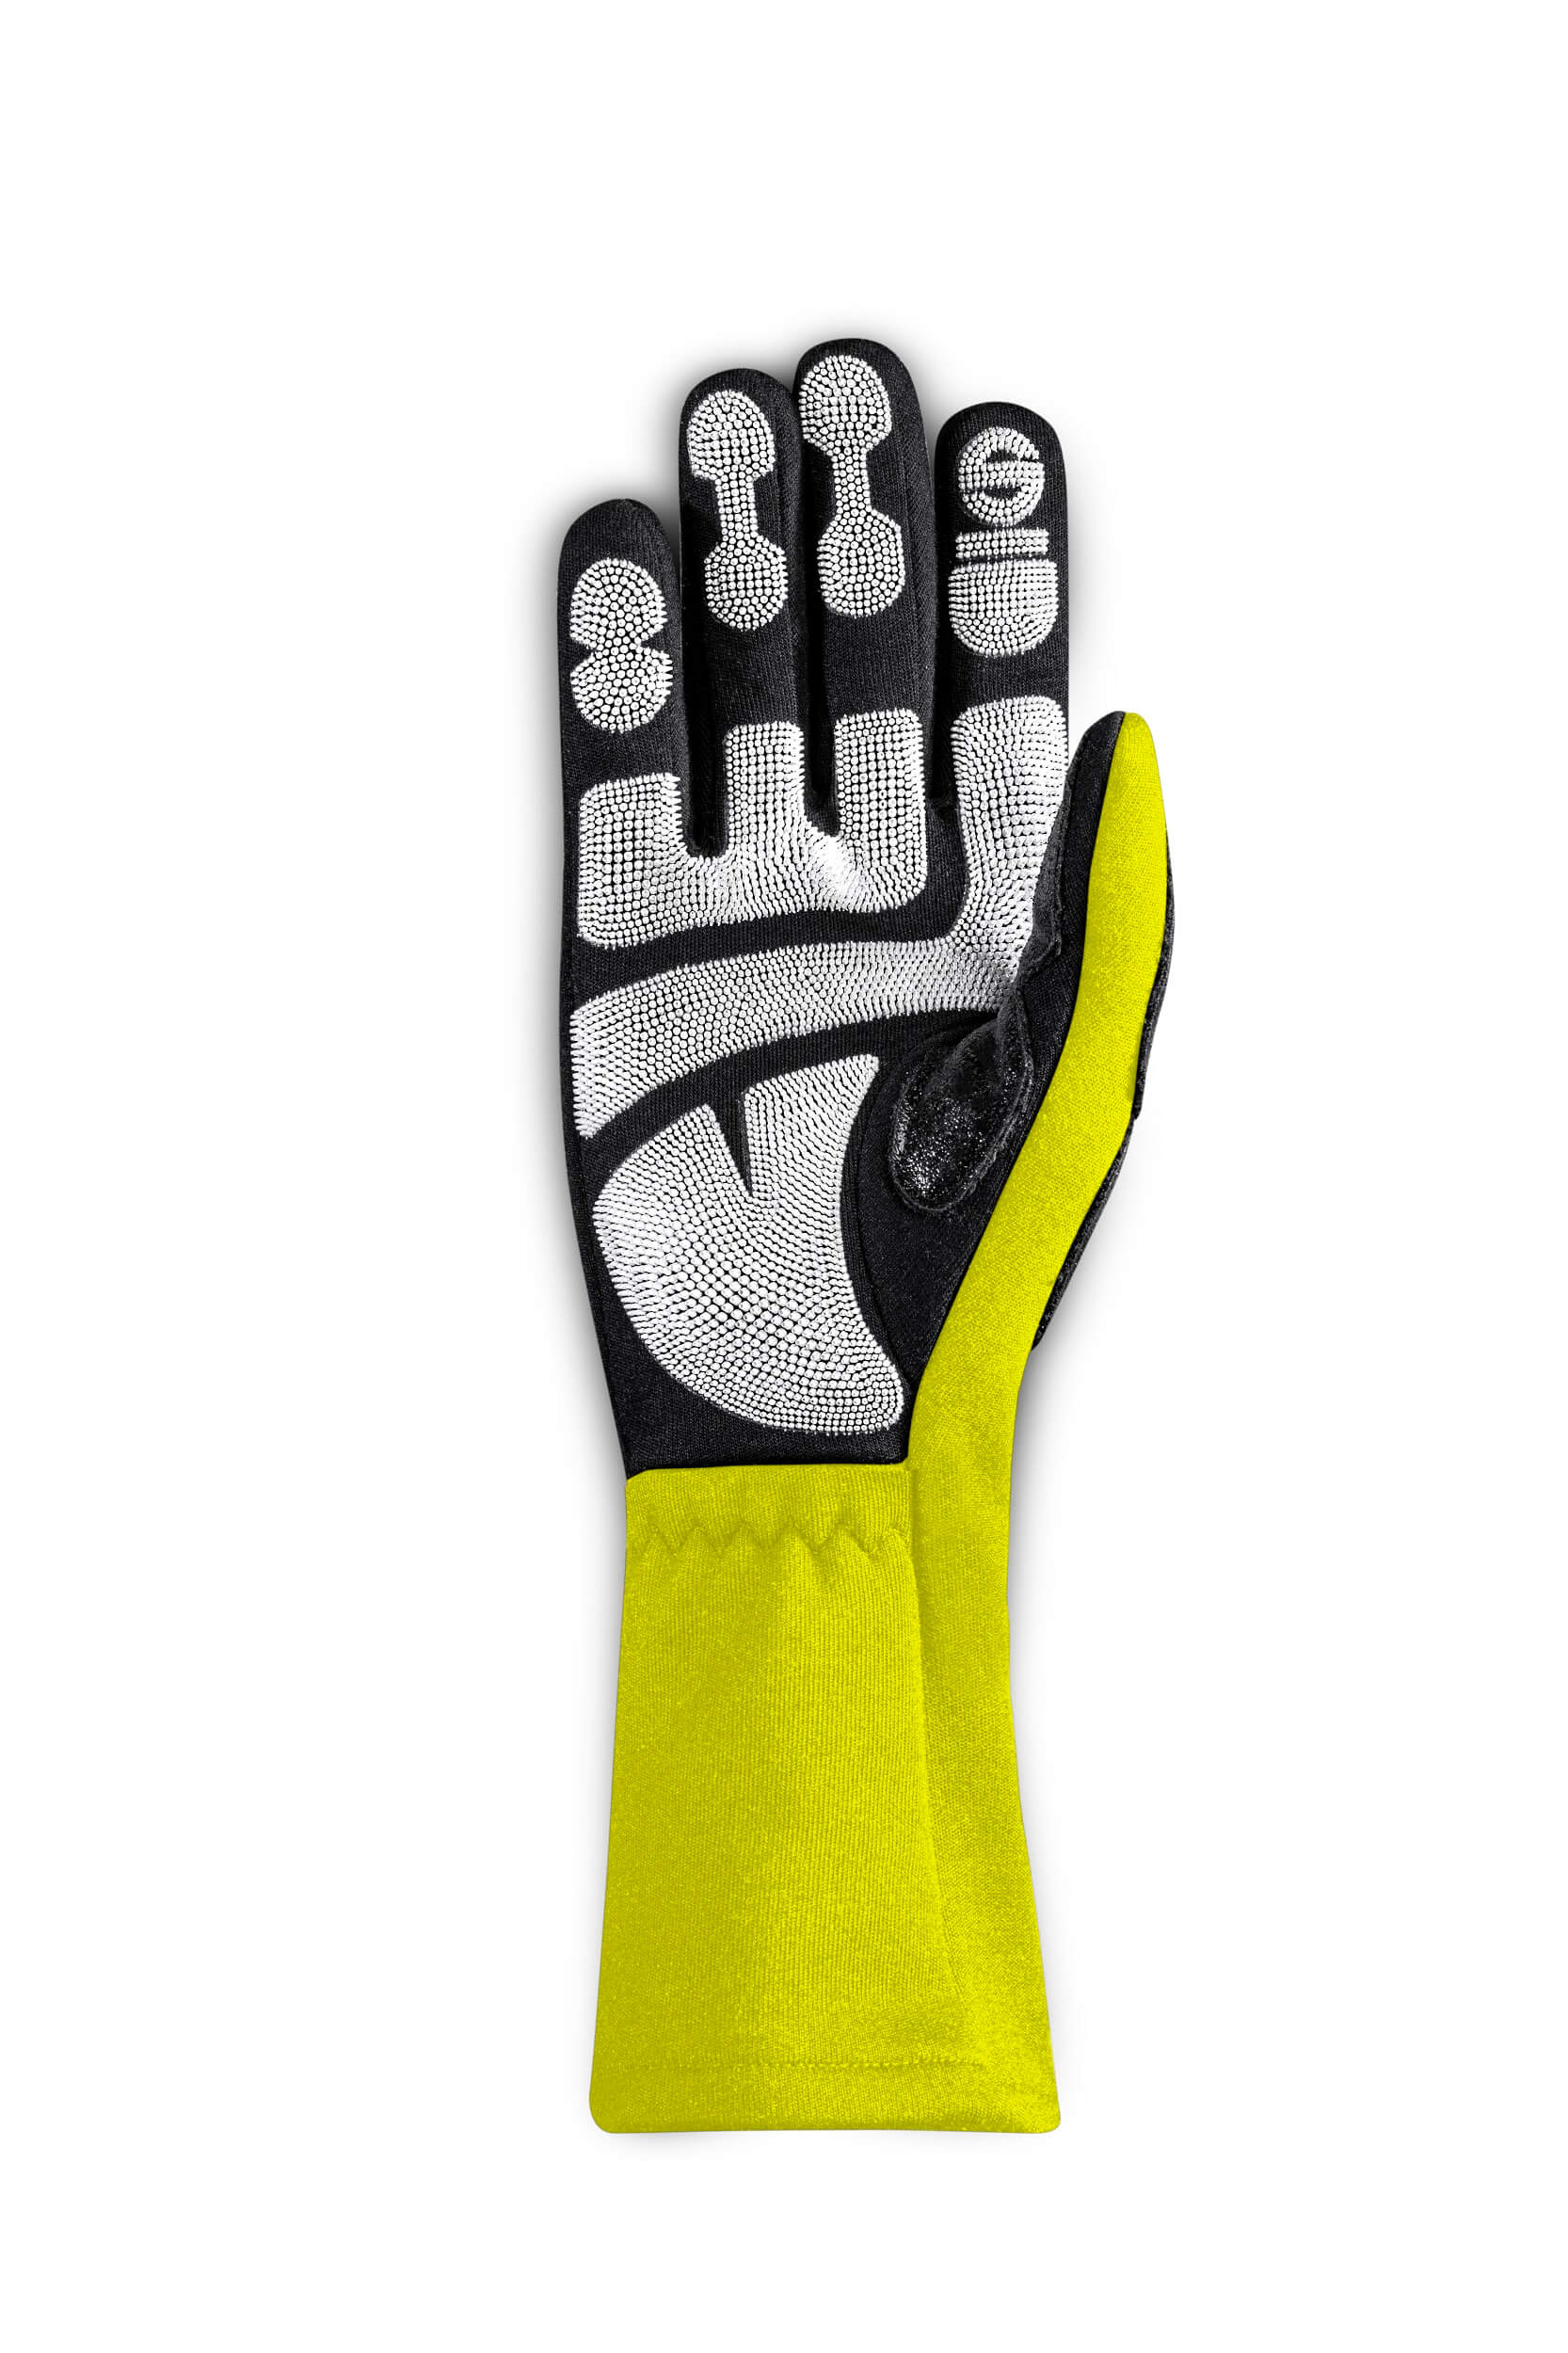 SPARCO 00131810GF TIDE MECA Gloves, NOT FIA, yellow, size 10 Photo-1 